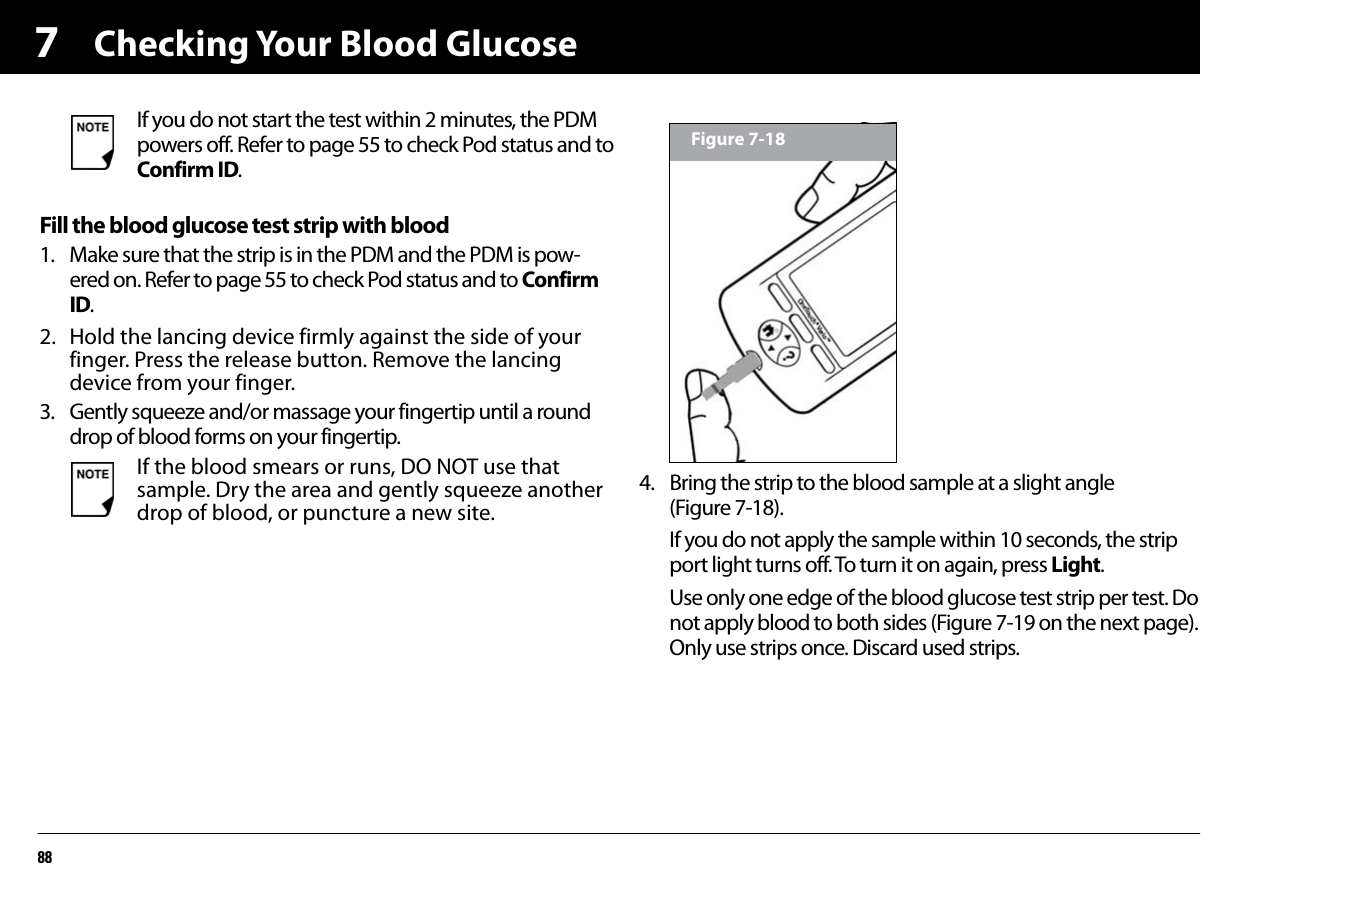 Checking Your Blood Glucose887Fill the blood glucose test strip with blood1. Make sure that the strip is in the PDM and the PDM is pow-ered on. Refer to page 55 to check Pod status and to Confirm ID. 2. Hold the lancing device firmly against the side of your finger. Press the release button. Remove the lancing device from your finger.3. Gently squeeze and/or massage your fingertip until a round drop of blood forms on your fingertip.4. Bring the strip to the blood sample at a slight angle (Figure 7-18).If you do not apply the sample within 10 seconds, the strip port light turns off. To turn it on again, press Light.Use only one edge of the blood glucose test strip per test. Do not apply blood to both sides (Figure 7-19 on the next page). Only use strips once. Discard used strips.If you do not start the test within 2 minutes, the PDM powers off. Refer to page 55 to check Pod status and to Confirm ID. If the blood smears or runs, DO NOT use that sample. Dry the area and gently squeeze another drop of blood, or puncture a new site.Figure 7-18